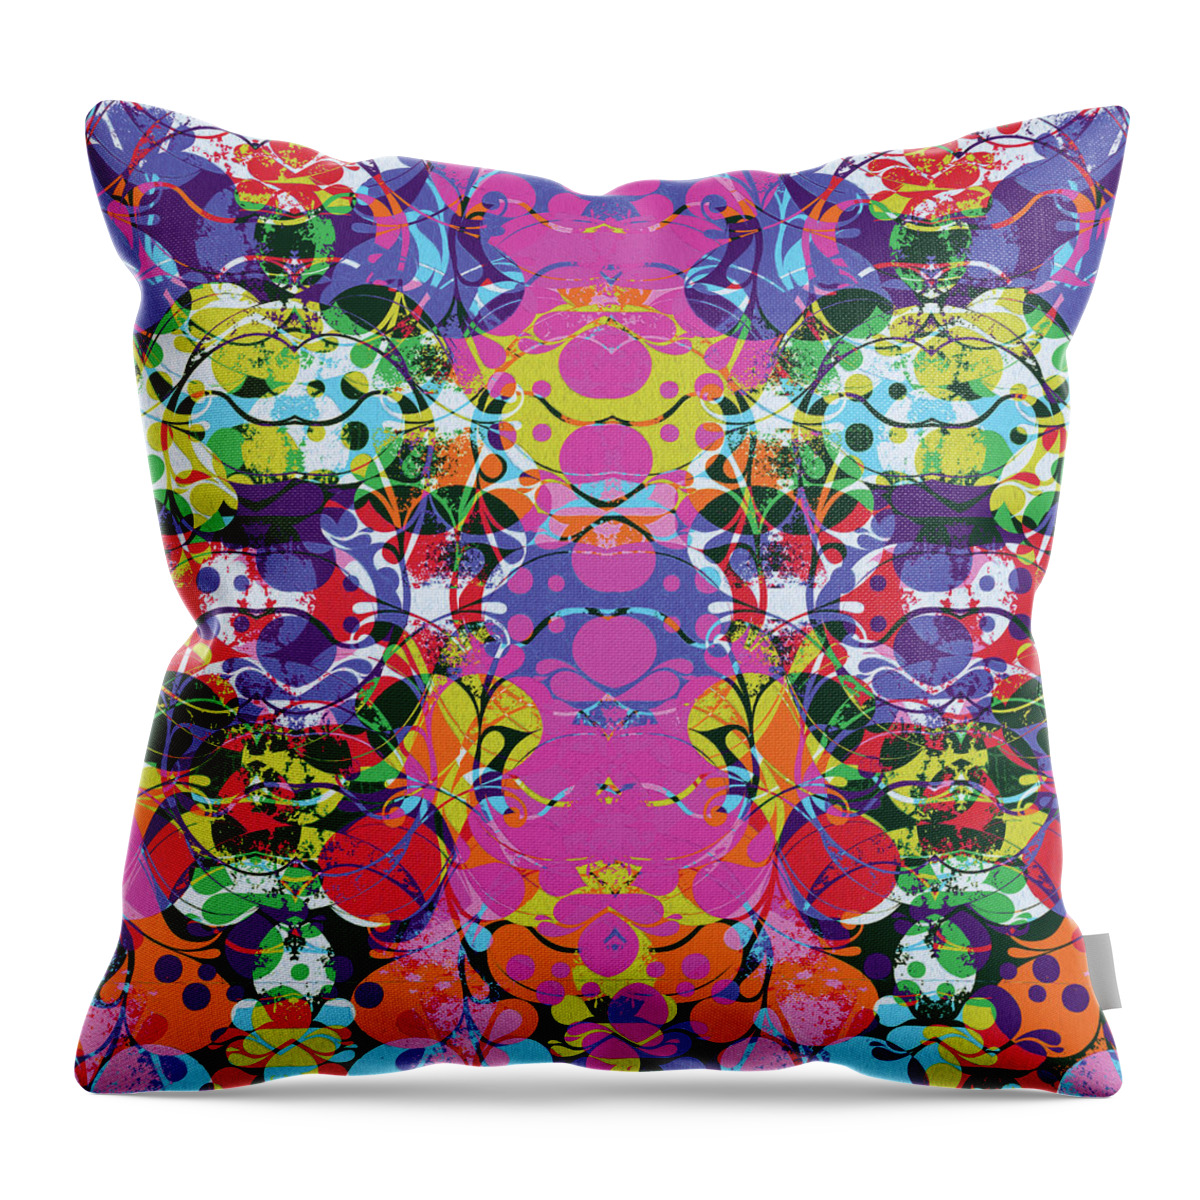 Beauty Throw Pillow featuring the digital art Perplexity #1 by Xrista Stavrou